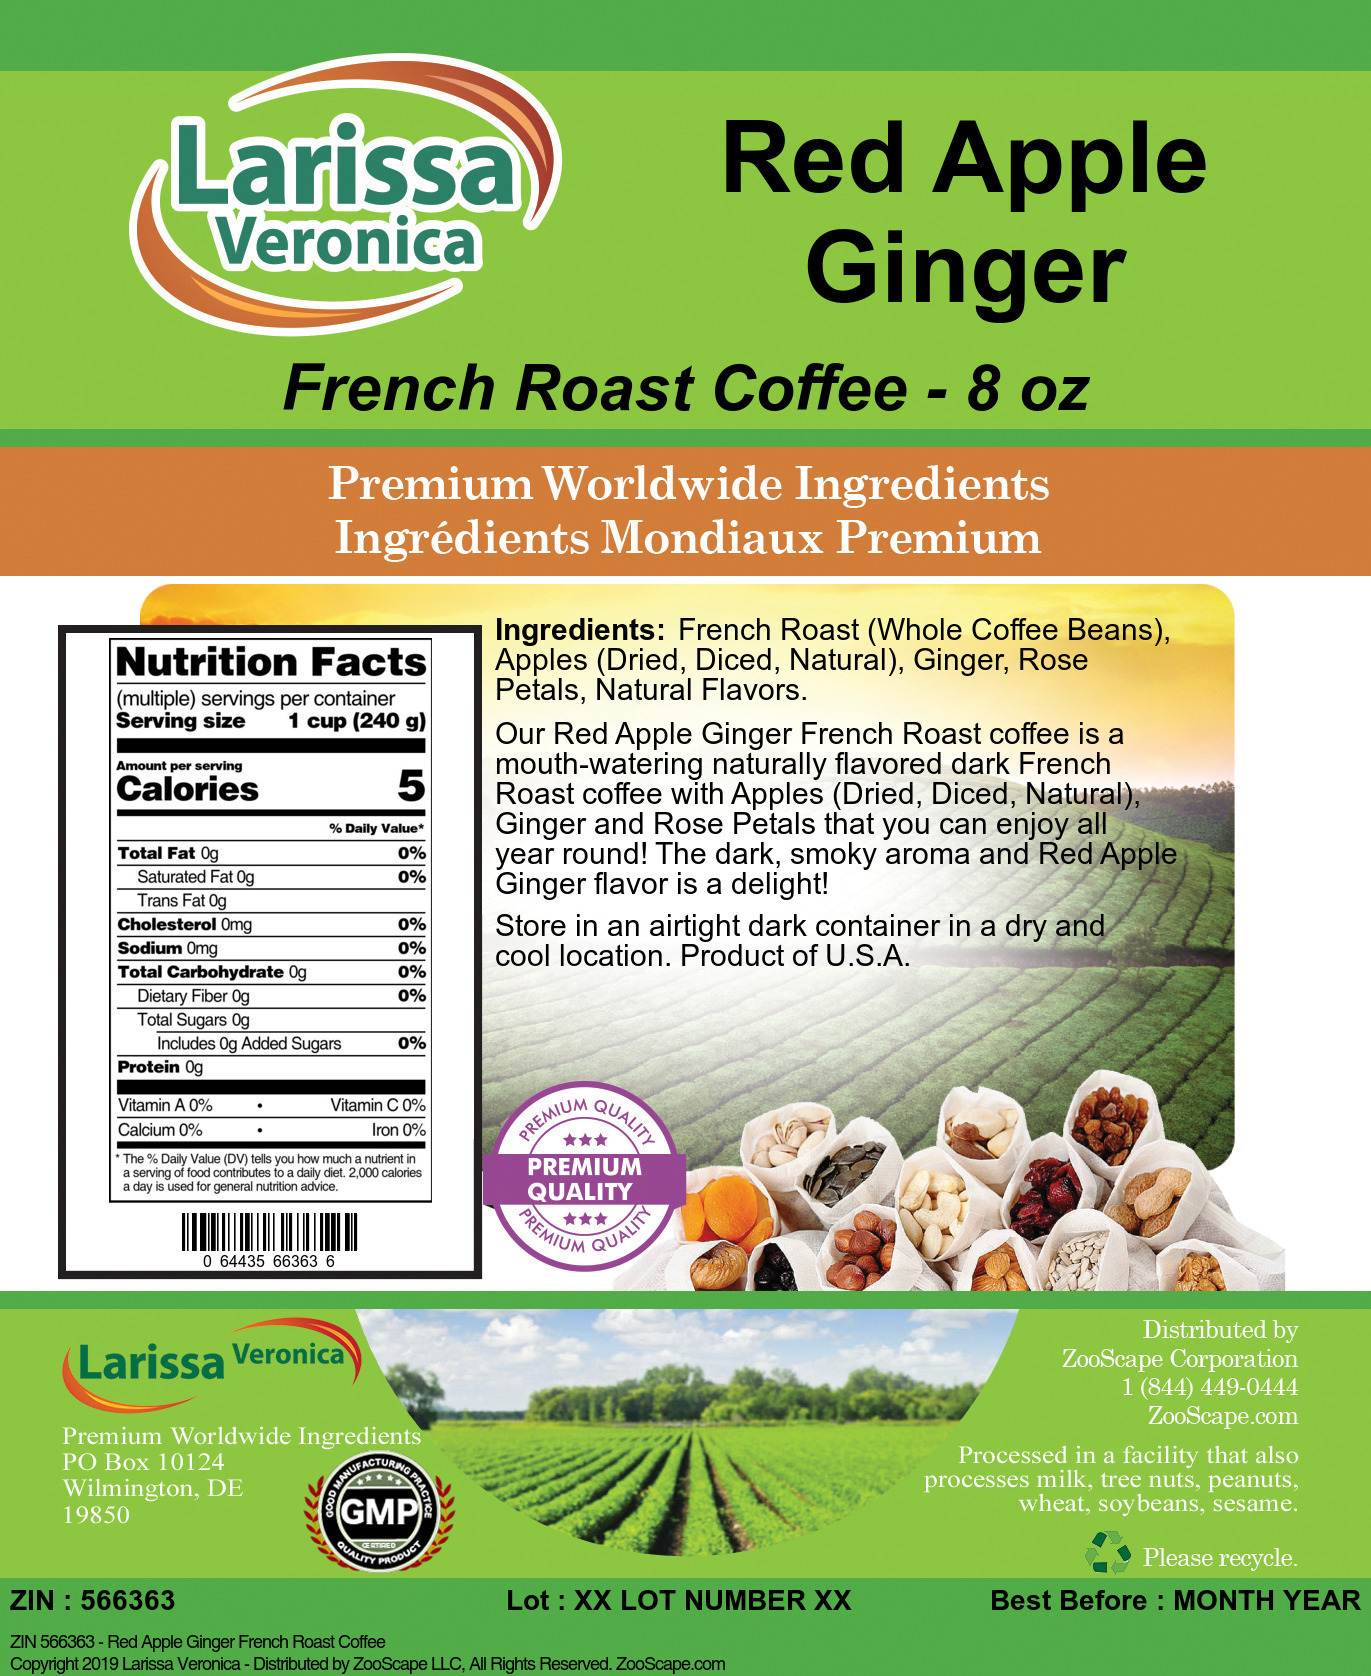 Red Apple Ginger French Roast Coffee - Label